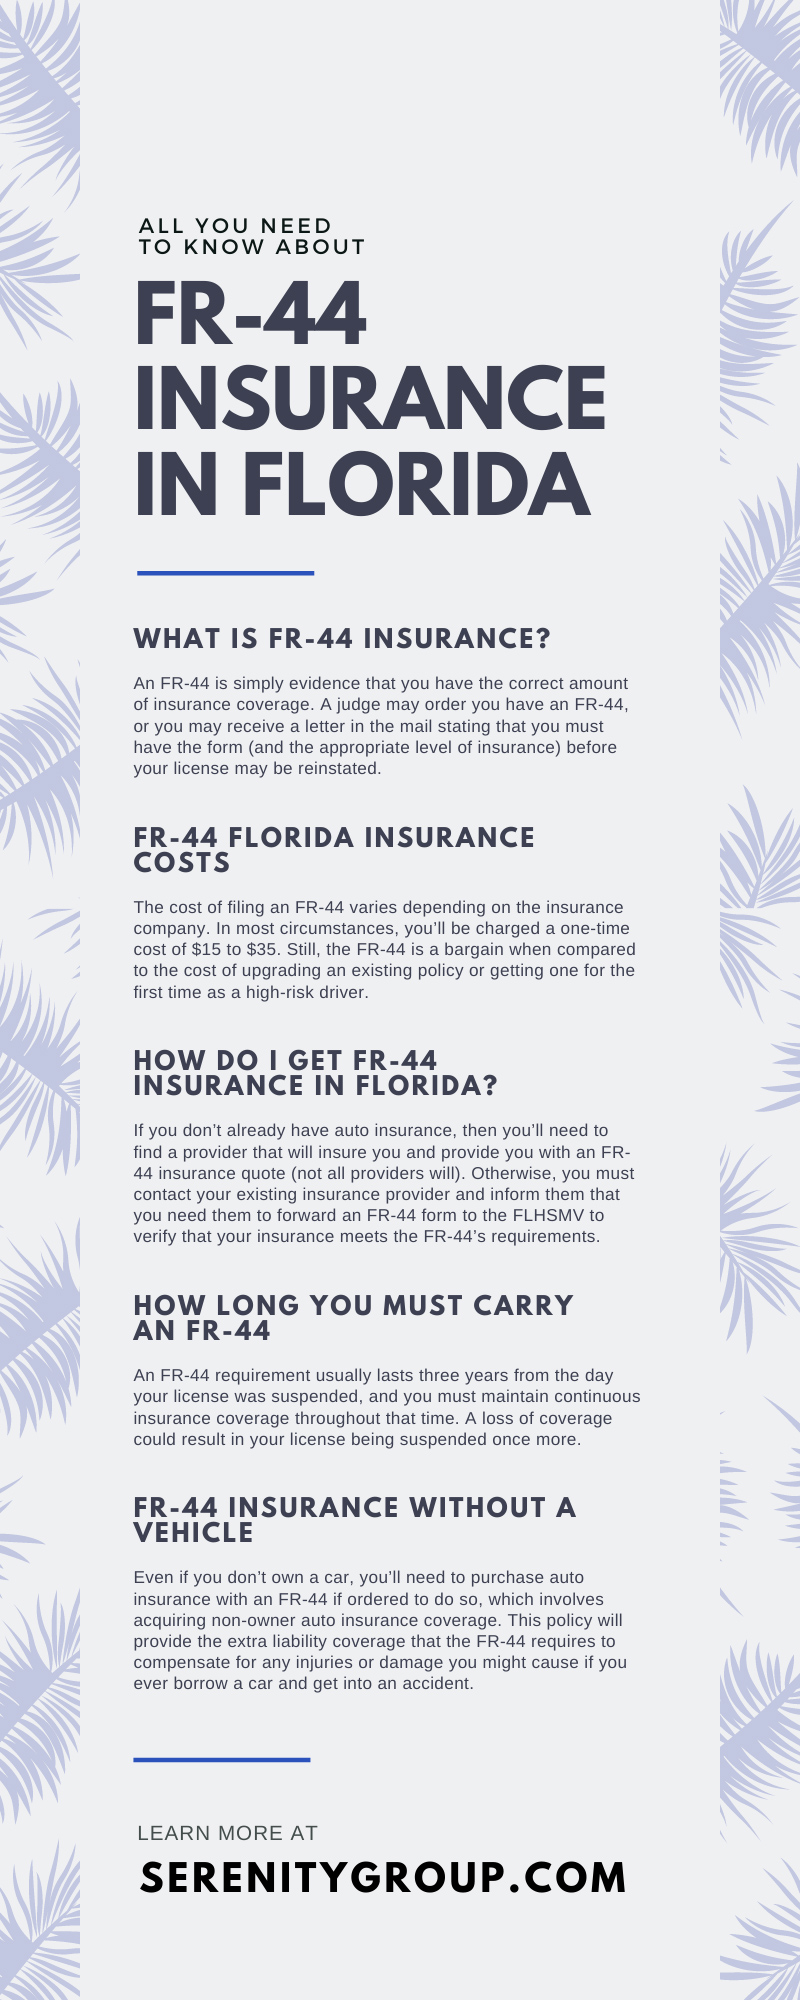 All You Need To Know About FR-44 Insurance in Florida